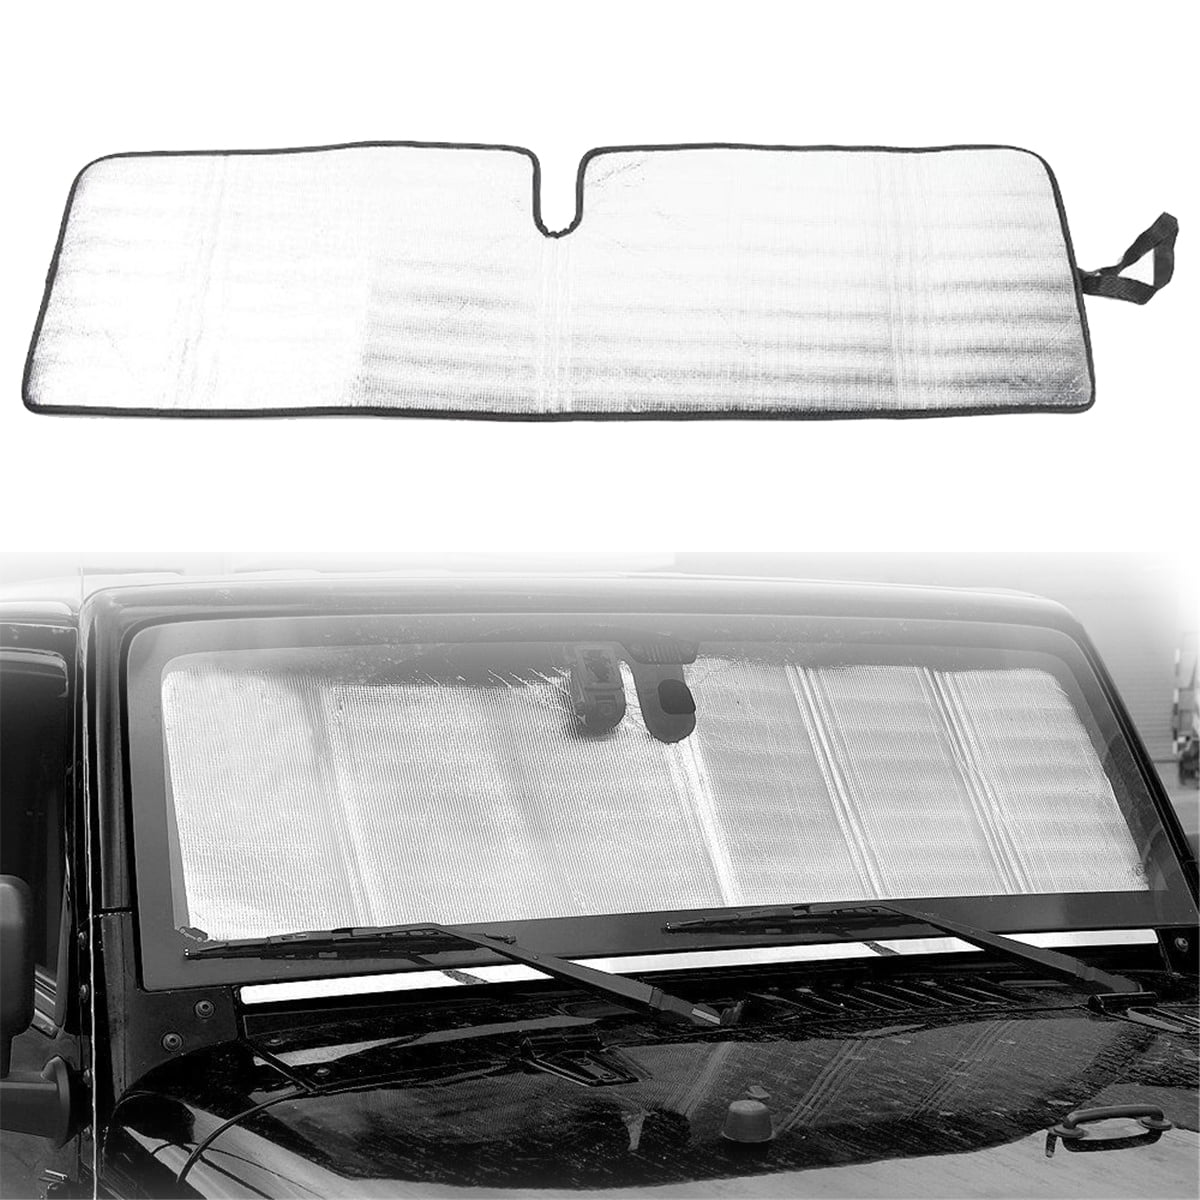 Bu_Gatti Lo_Go Car Windshield Sun Shade Easy to Use Fits Windshields of Various Sizes Sunshade to Keep Your Vehicle Cool and Damage Free Blocks Uv Rays Sun Visor Protector